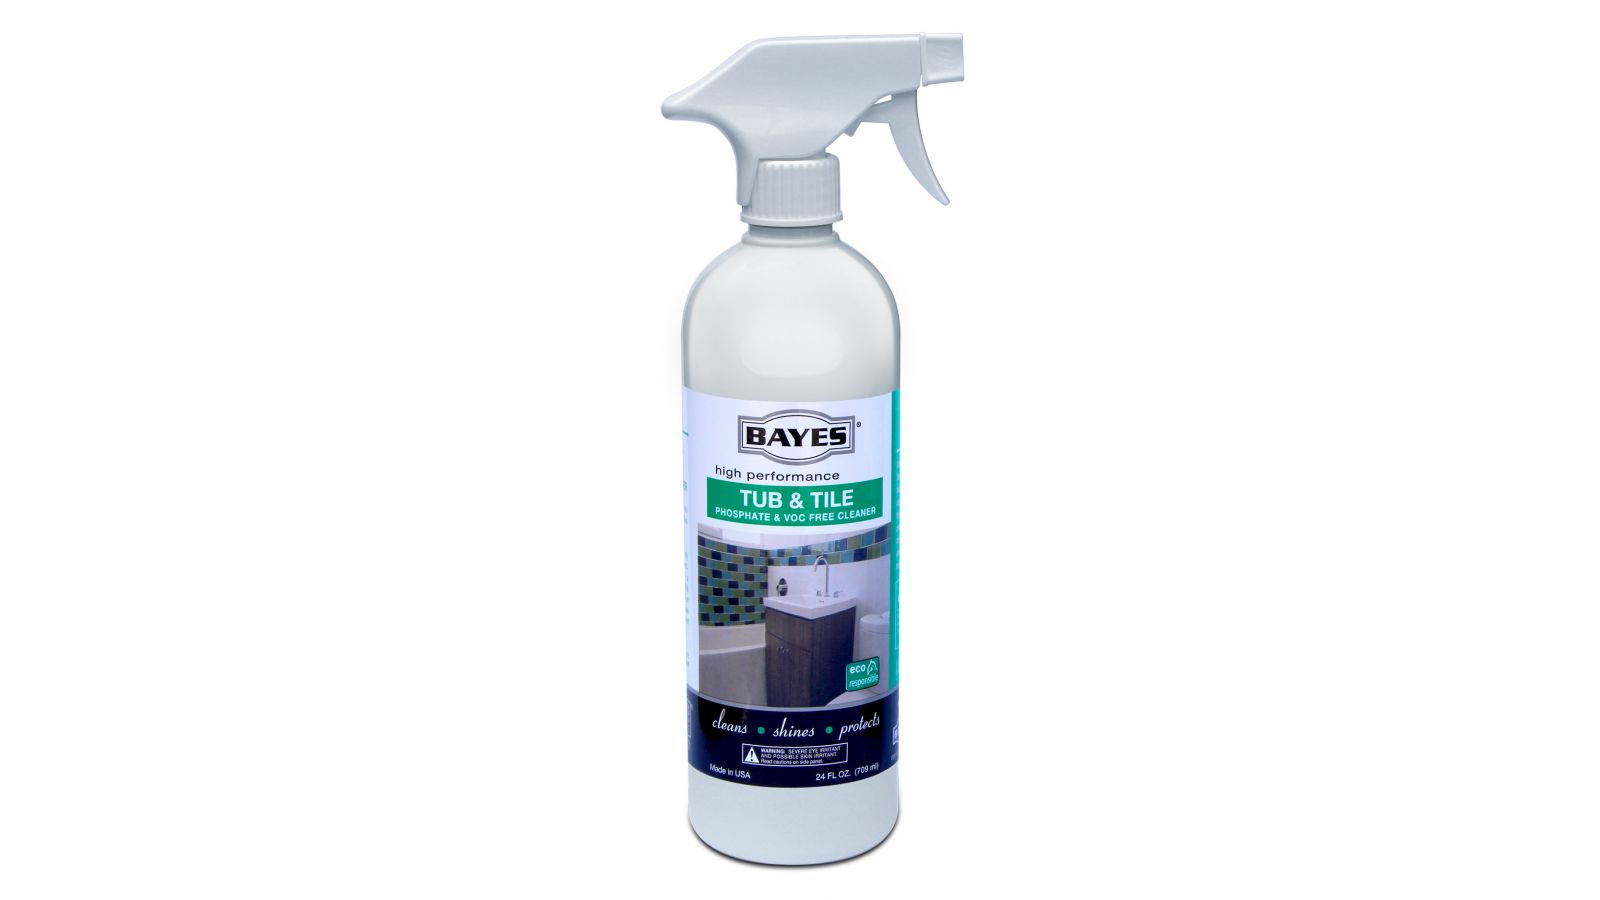 Bayes High-Performance Eco-Responsible Tub & Tile Cleaner - Cleans, Shines, and Protects